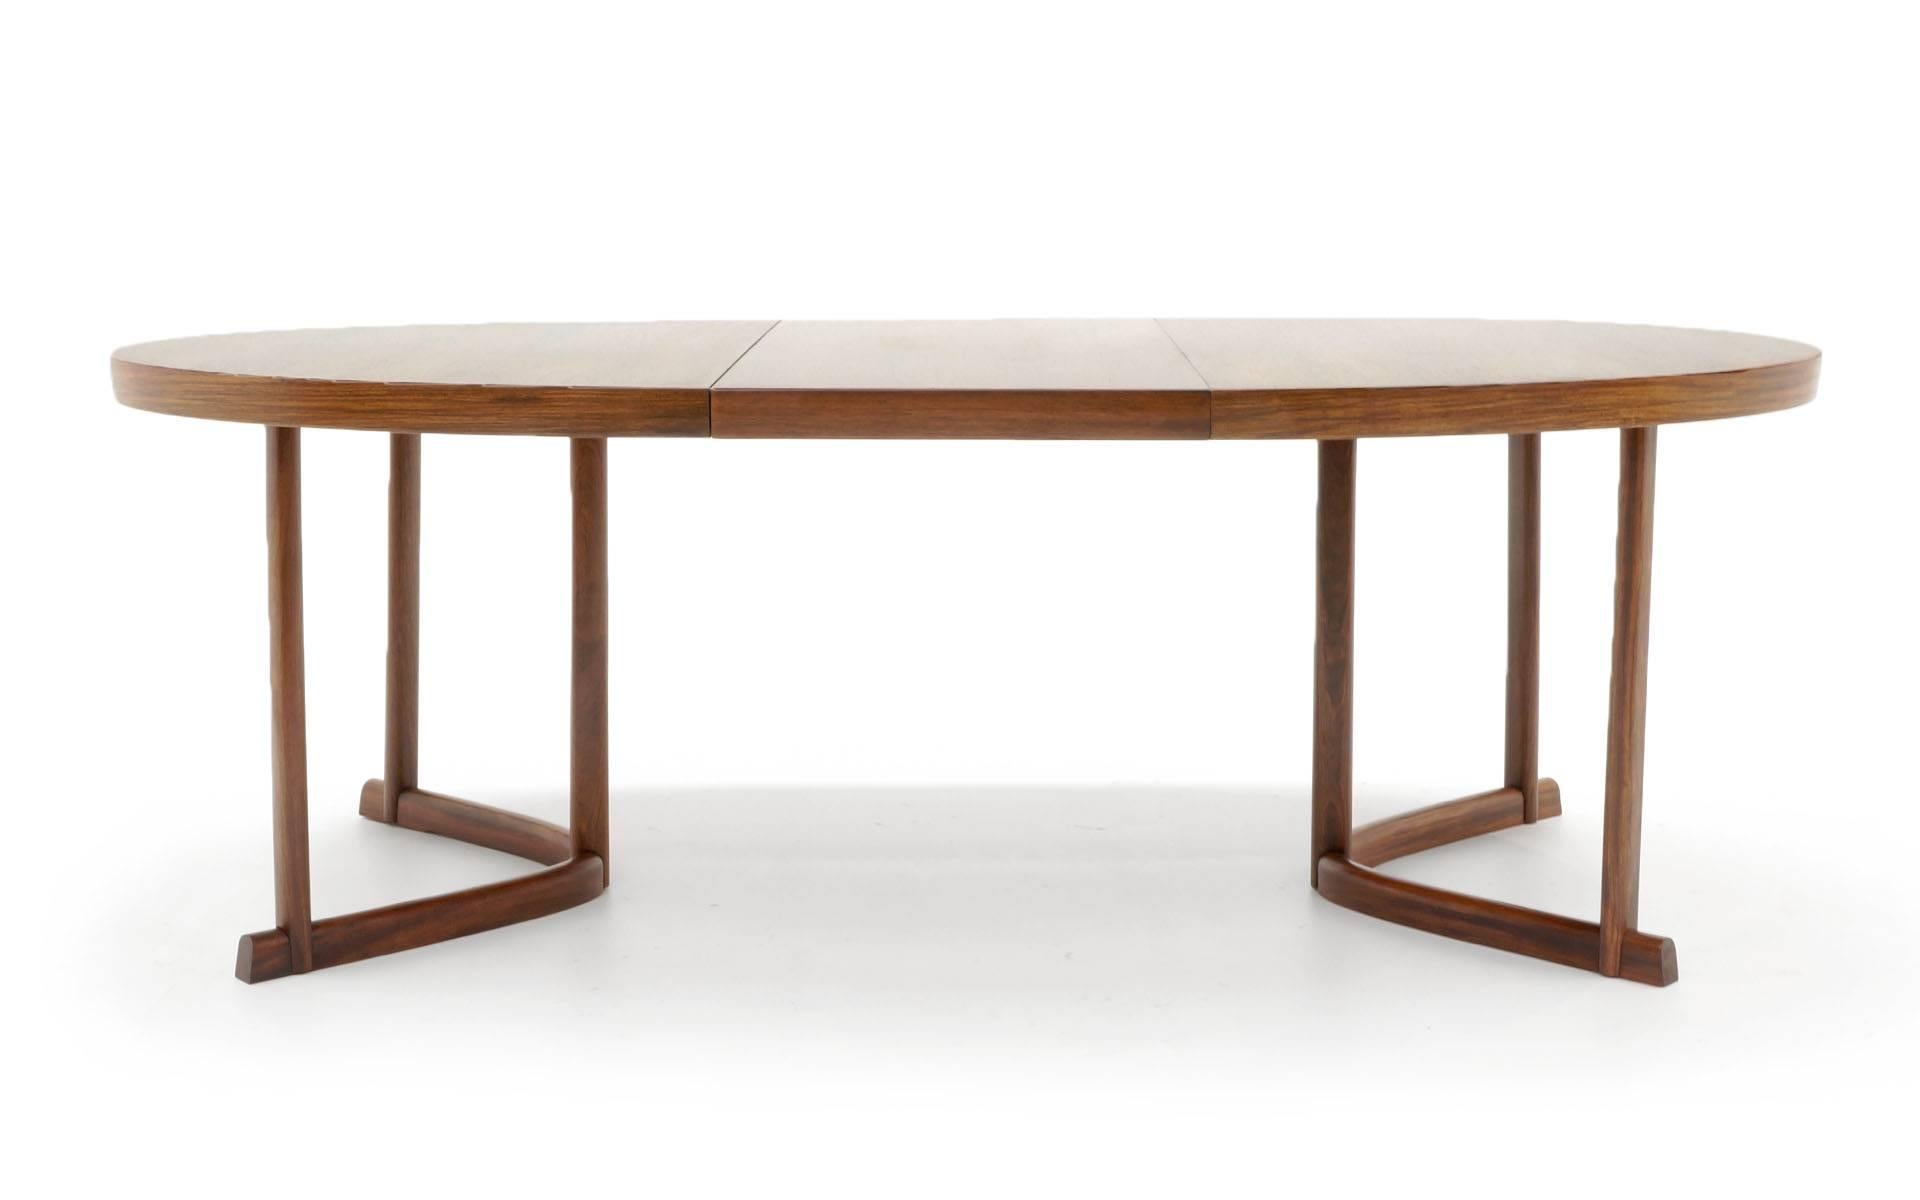 Scandinavian Modern Danish Modern Rosewood Dining Table with Leaf, Excellent Condition